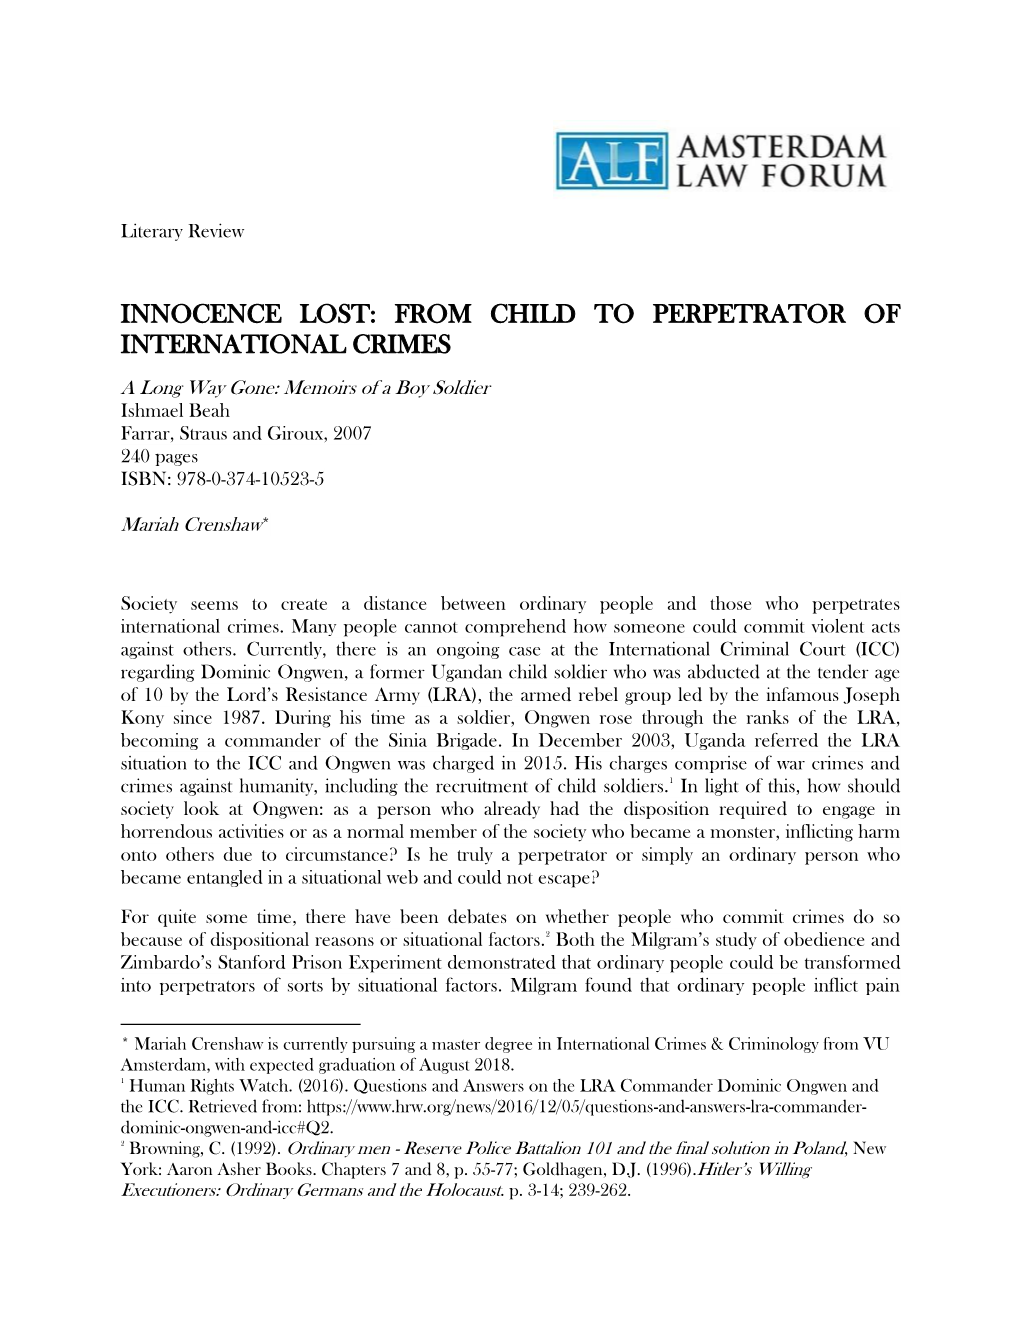 From Child to Perpetrator of International Crimes